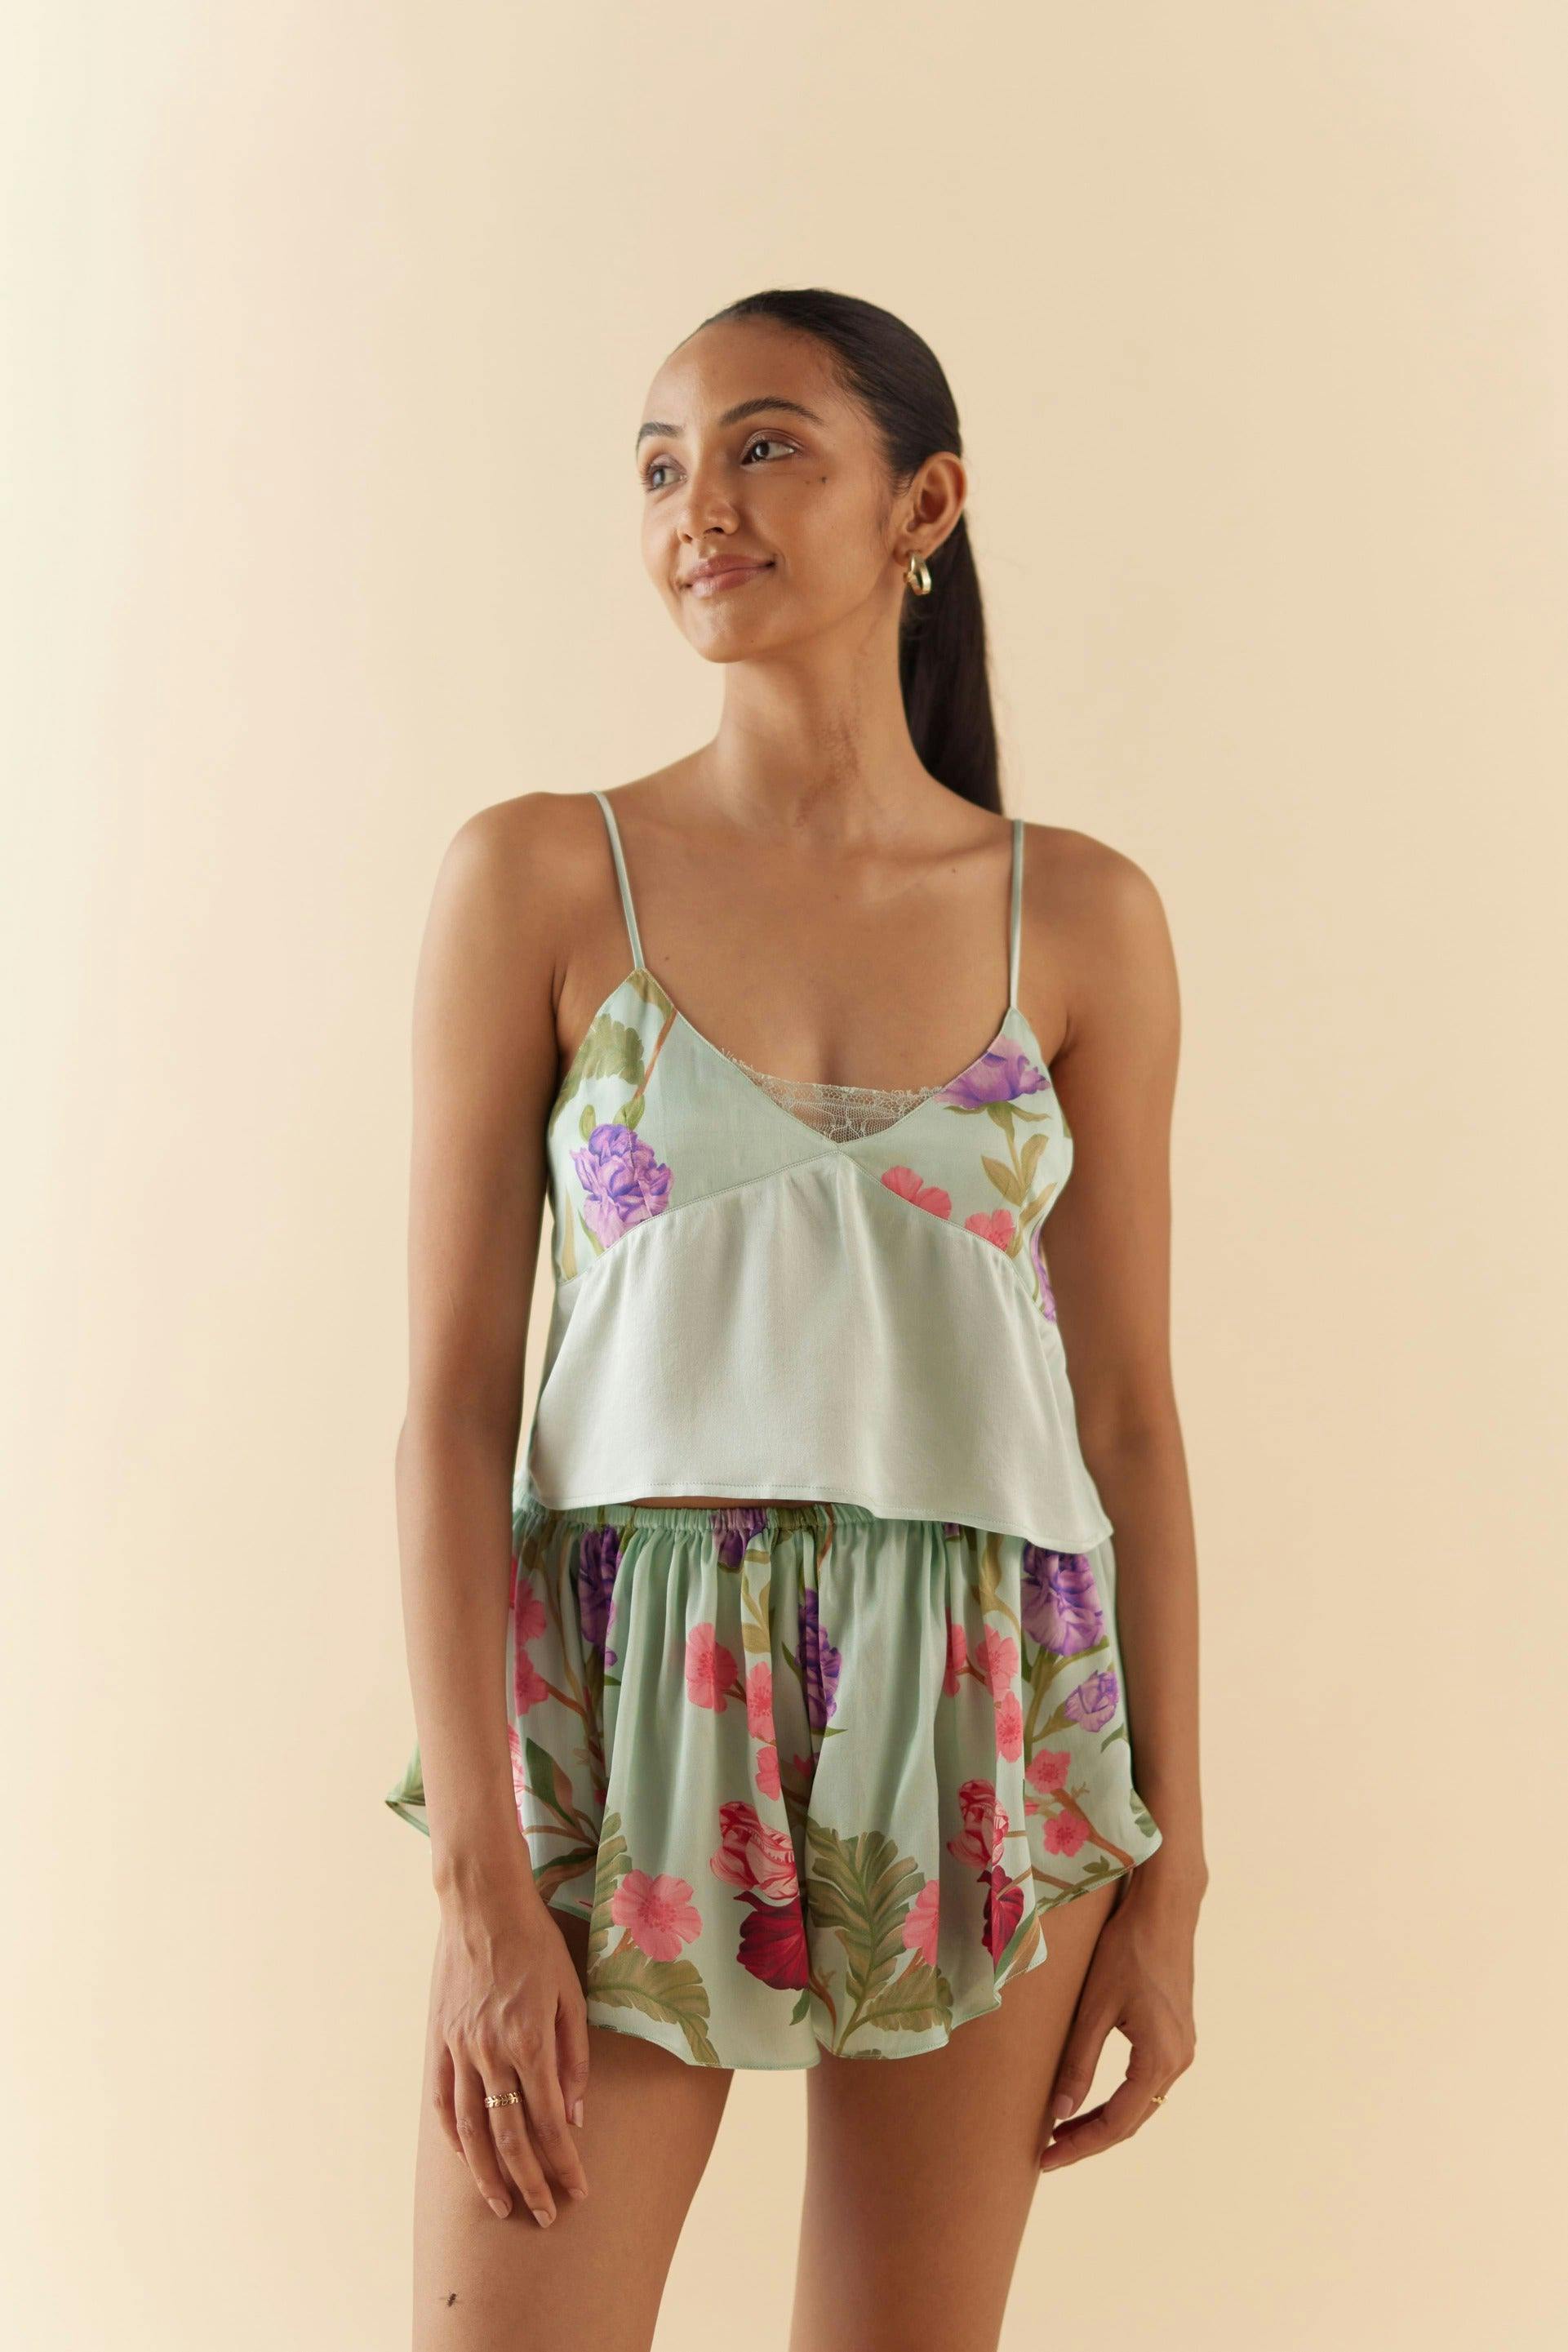 Celeste Floral Dream Cropped Camisole, a product by Sleeplove